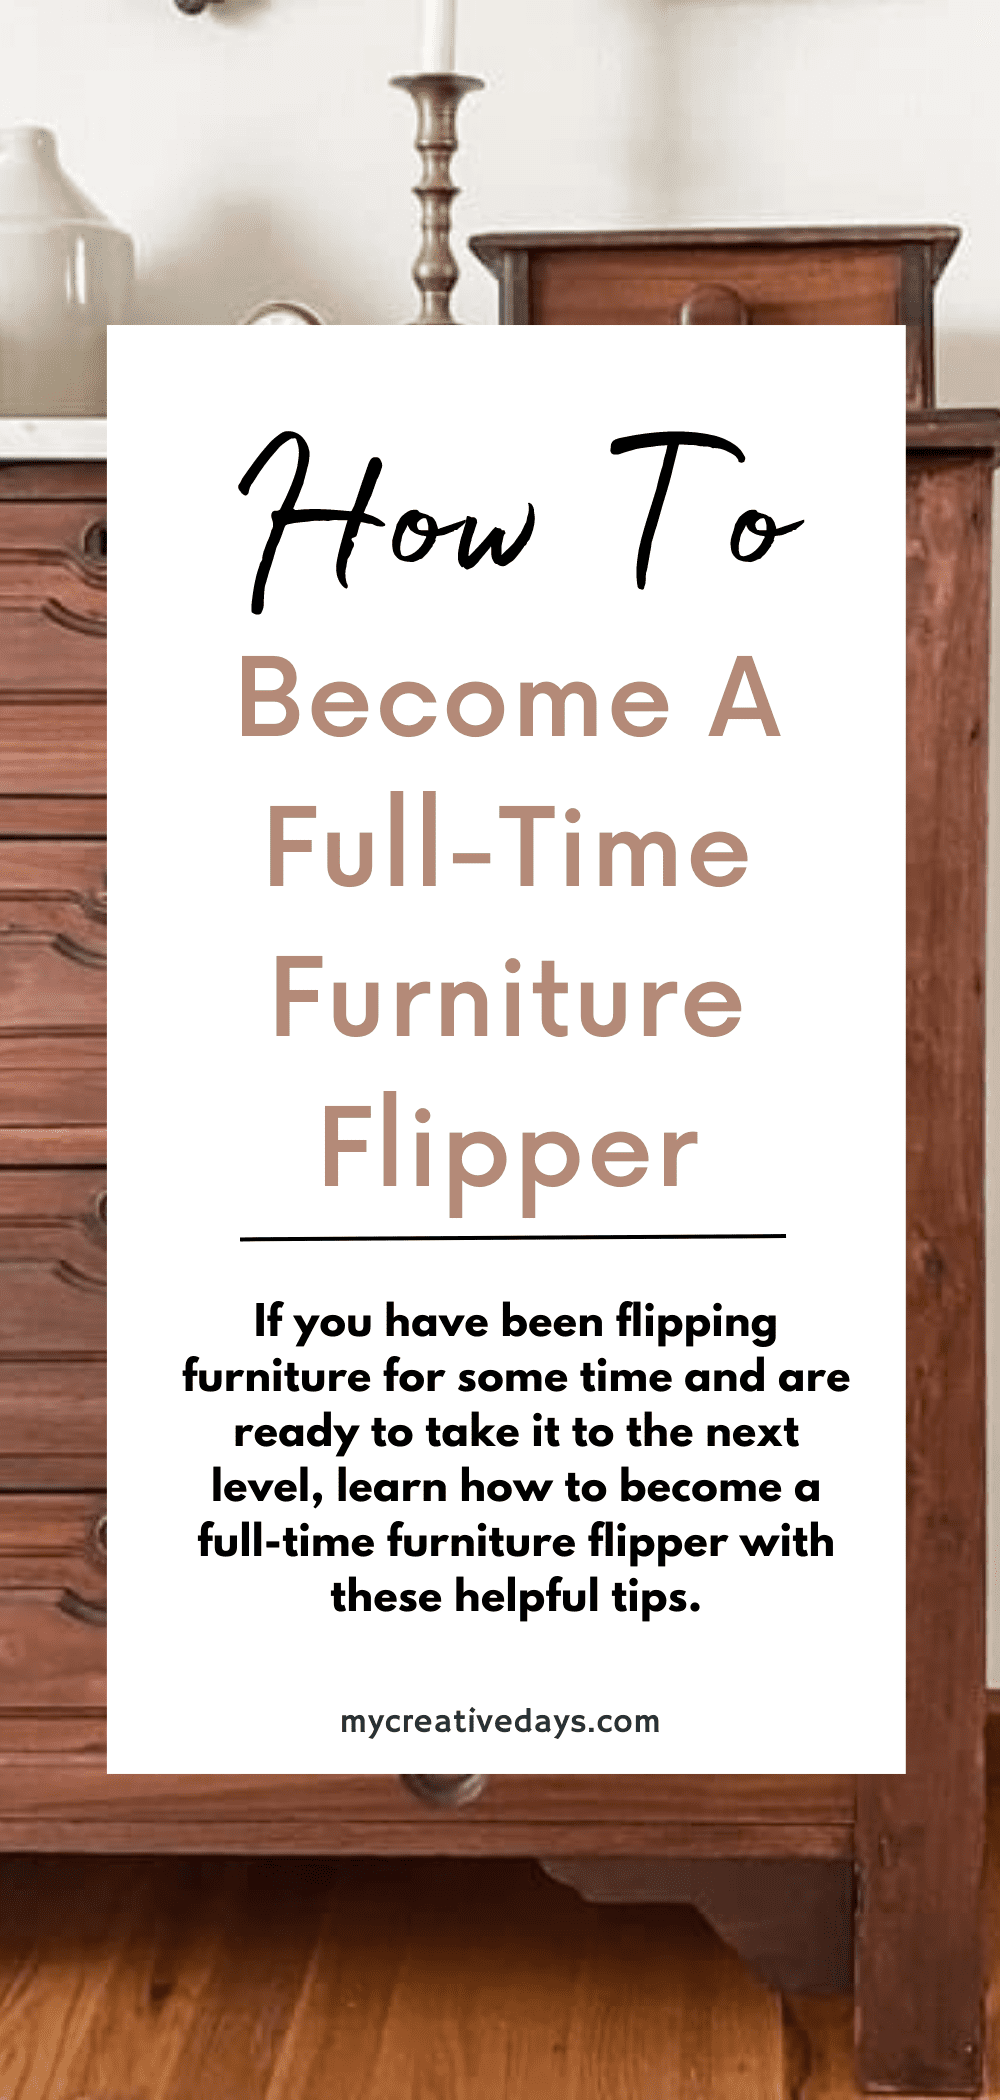 Have you been flipping and are ready to take it to the next level? Learn how to become a full-time furniture flipper with these tips.